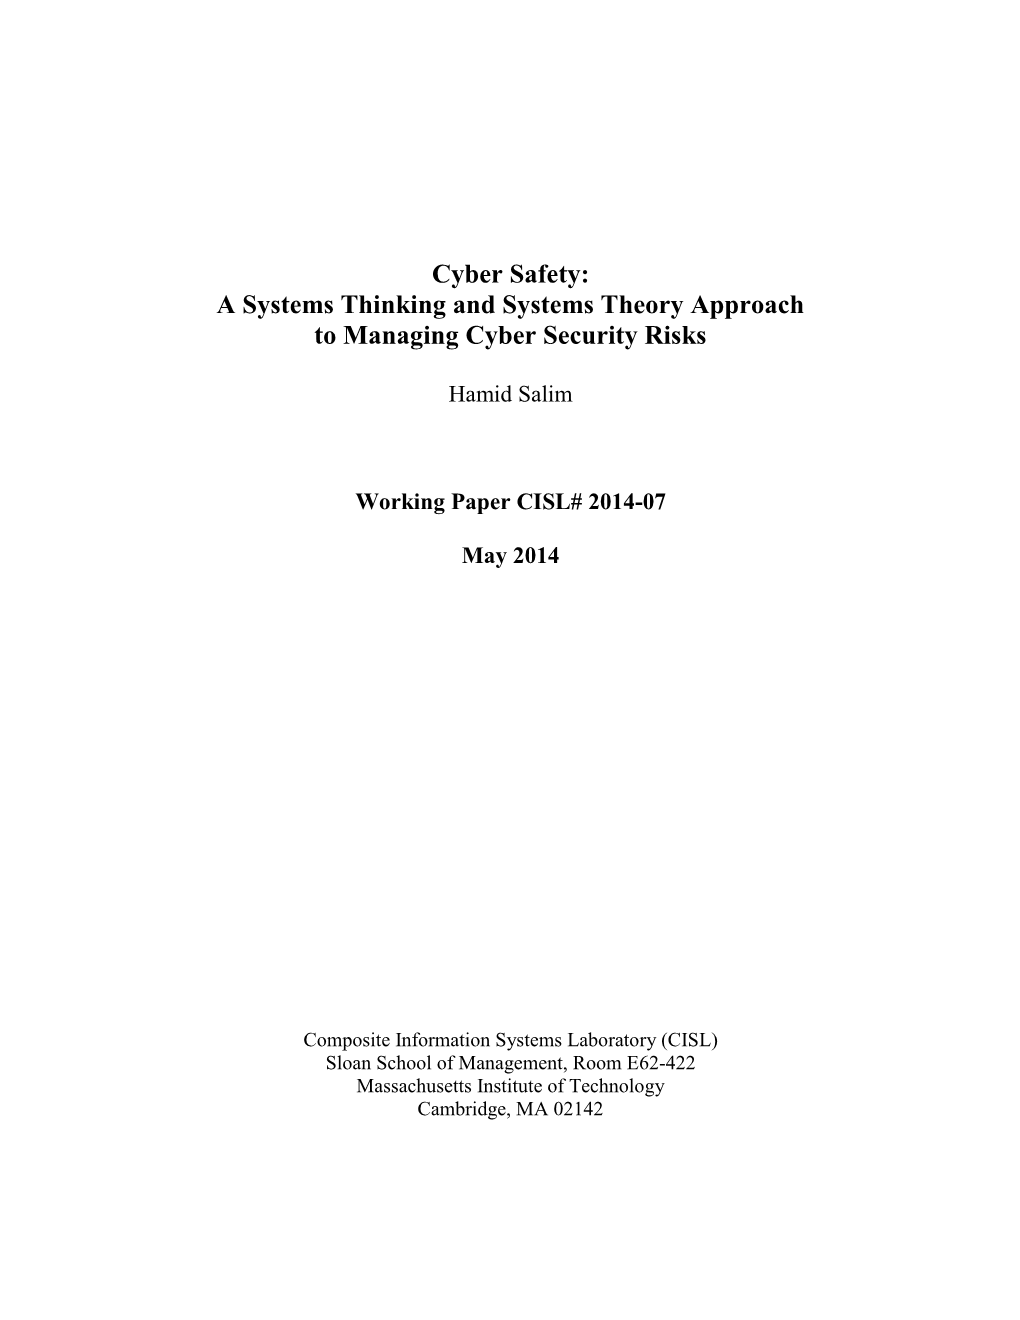 A Systems Thinking and Systems Theory Approach to Managing Cyber Security Risks